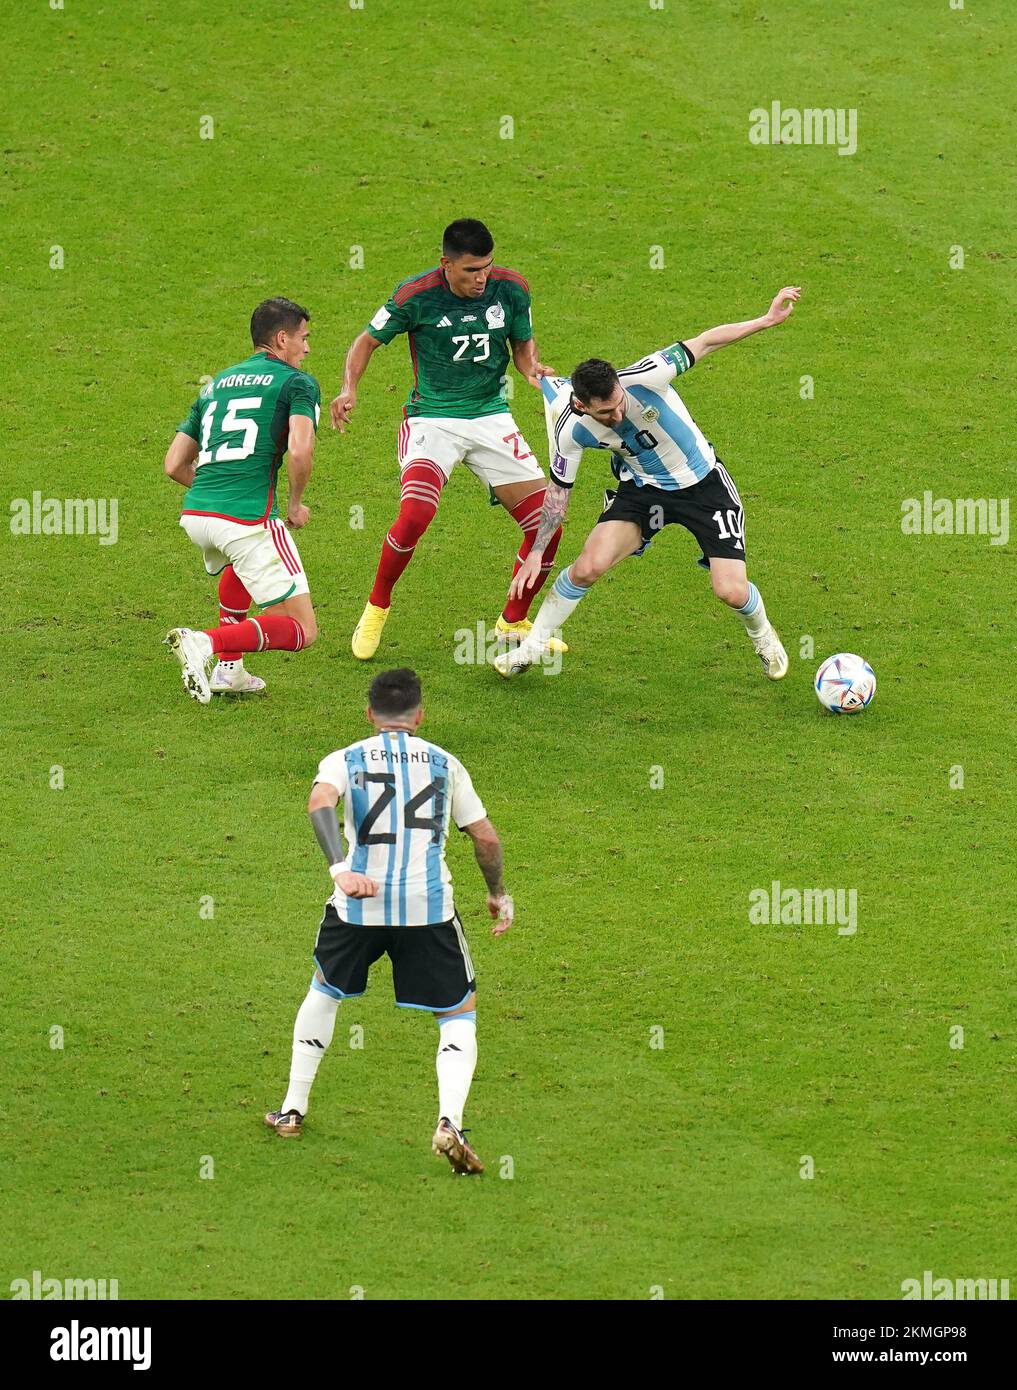 Mexico's Hector Moreno, Jesus Gallardo and Argentina's Lionel Messi (left-right) battle for the ball during the FIFA World Cup Group C match at the Lusail Stadium in Lusail, Qatar. Picture date: Saturday November 26, 2022. Stock Photo